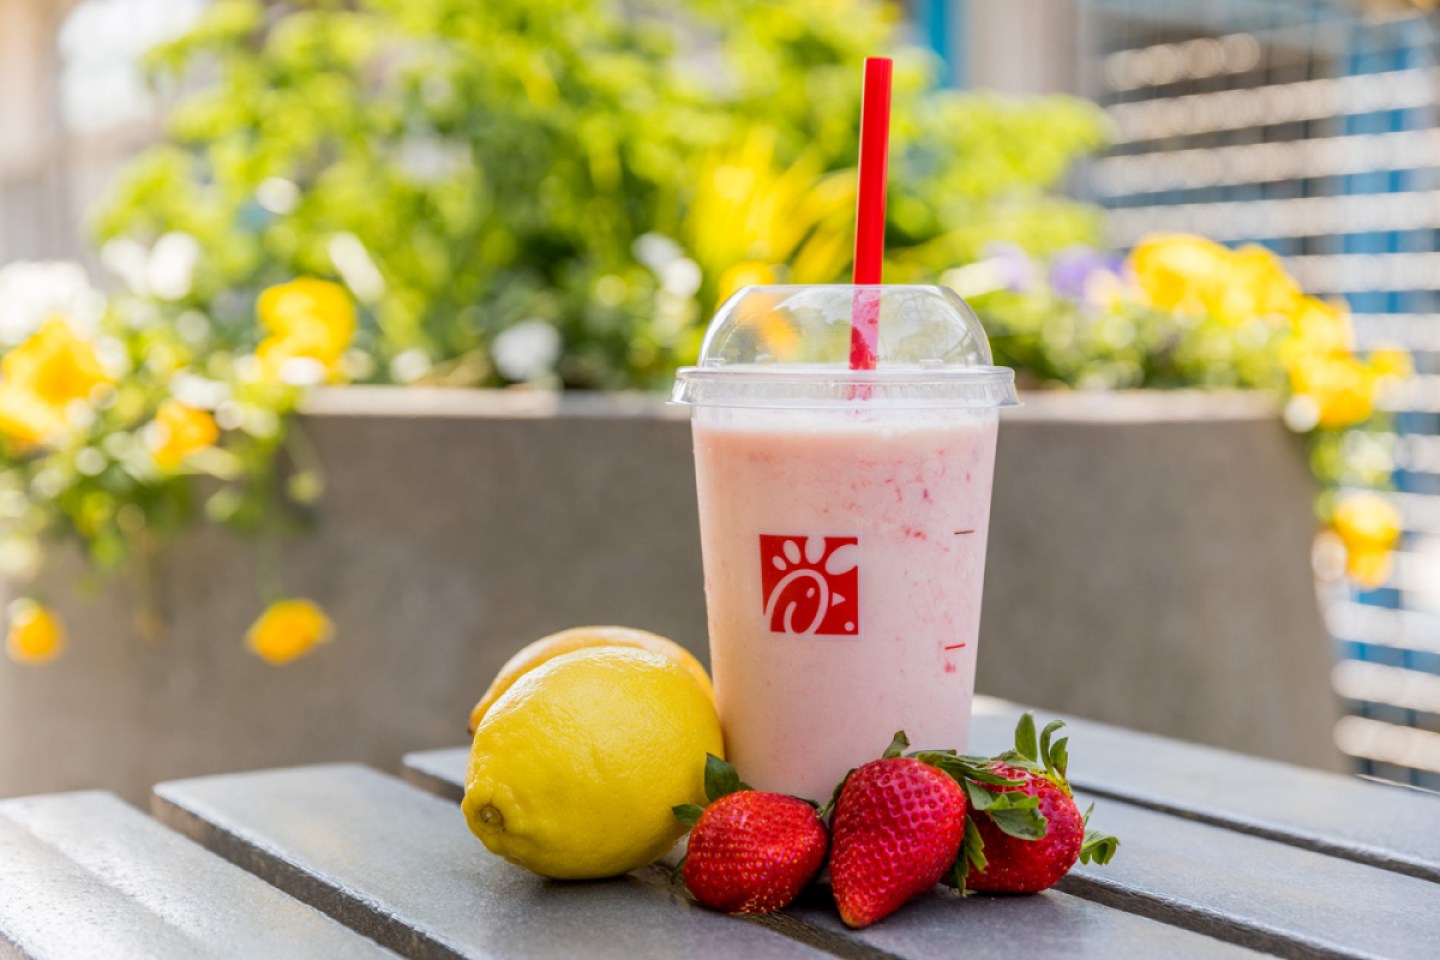 Strawberry lemonade from Chick-fil-A.